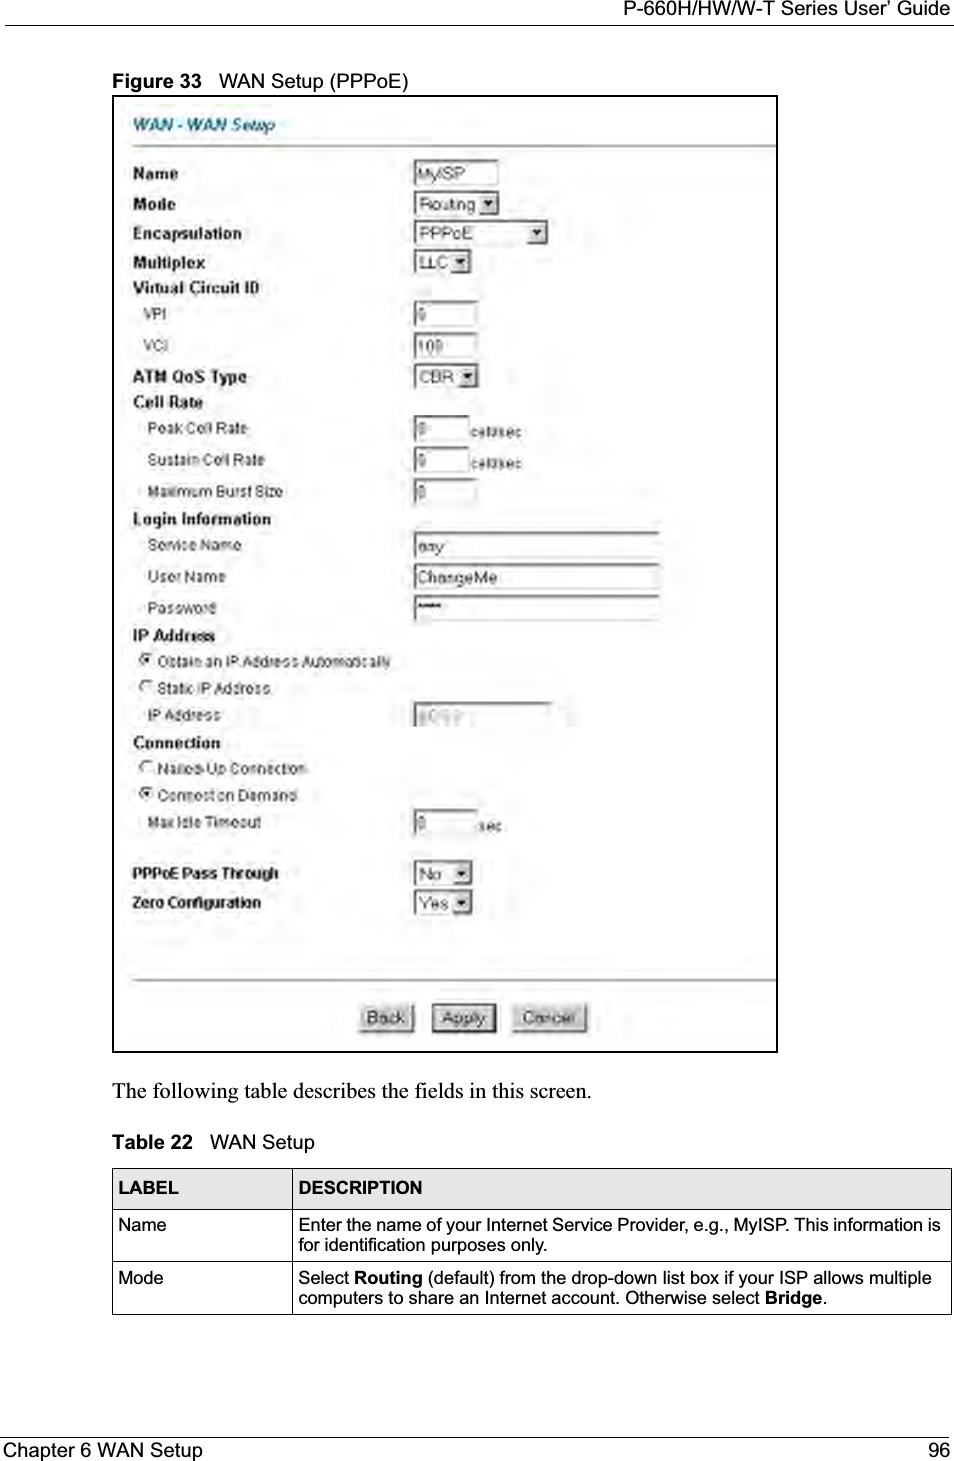 P-660H/HW/W-T Series User’ GuideChapter 6 WAN Setup 96Figure 33   WAN Setup (PPPoE)The following table describes the fields in this screen.  Table 22   WAN SetupLABEL DESCRIPTIONName Enter the name of your Internet Service Provider, e.g., MyISP. This information is for identification purposes only.Mode Select Routing (default) from the drop-down list box if your ISP allows multiple computers to share an Internet account. Otherwise select Bridge.